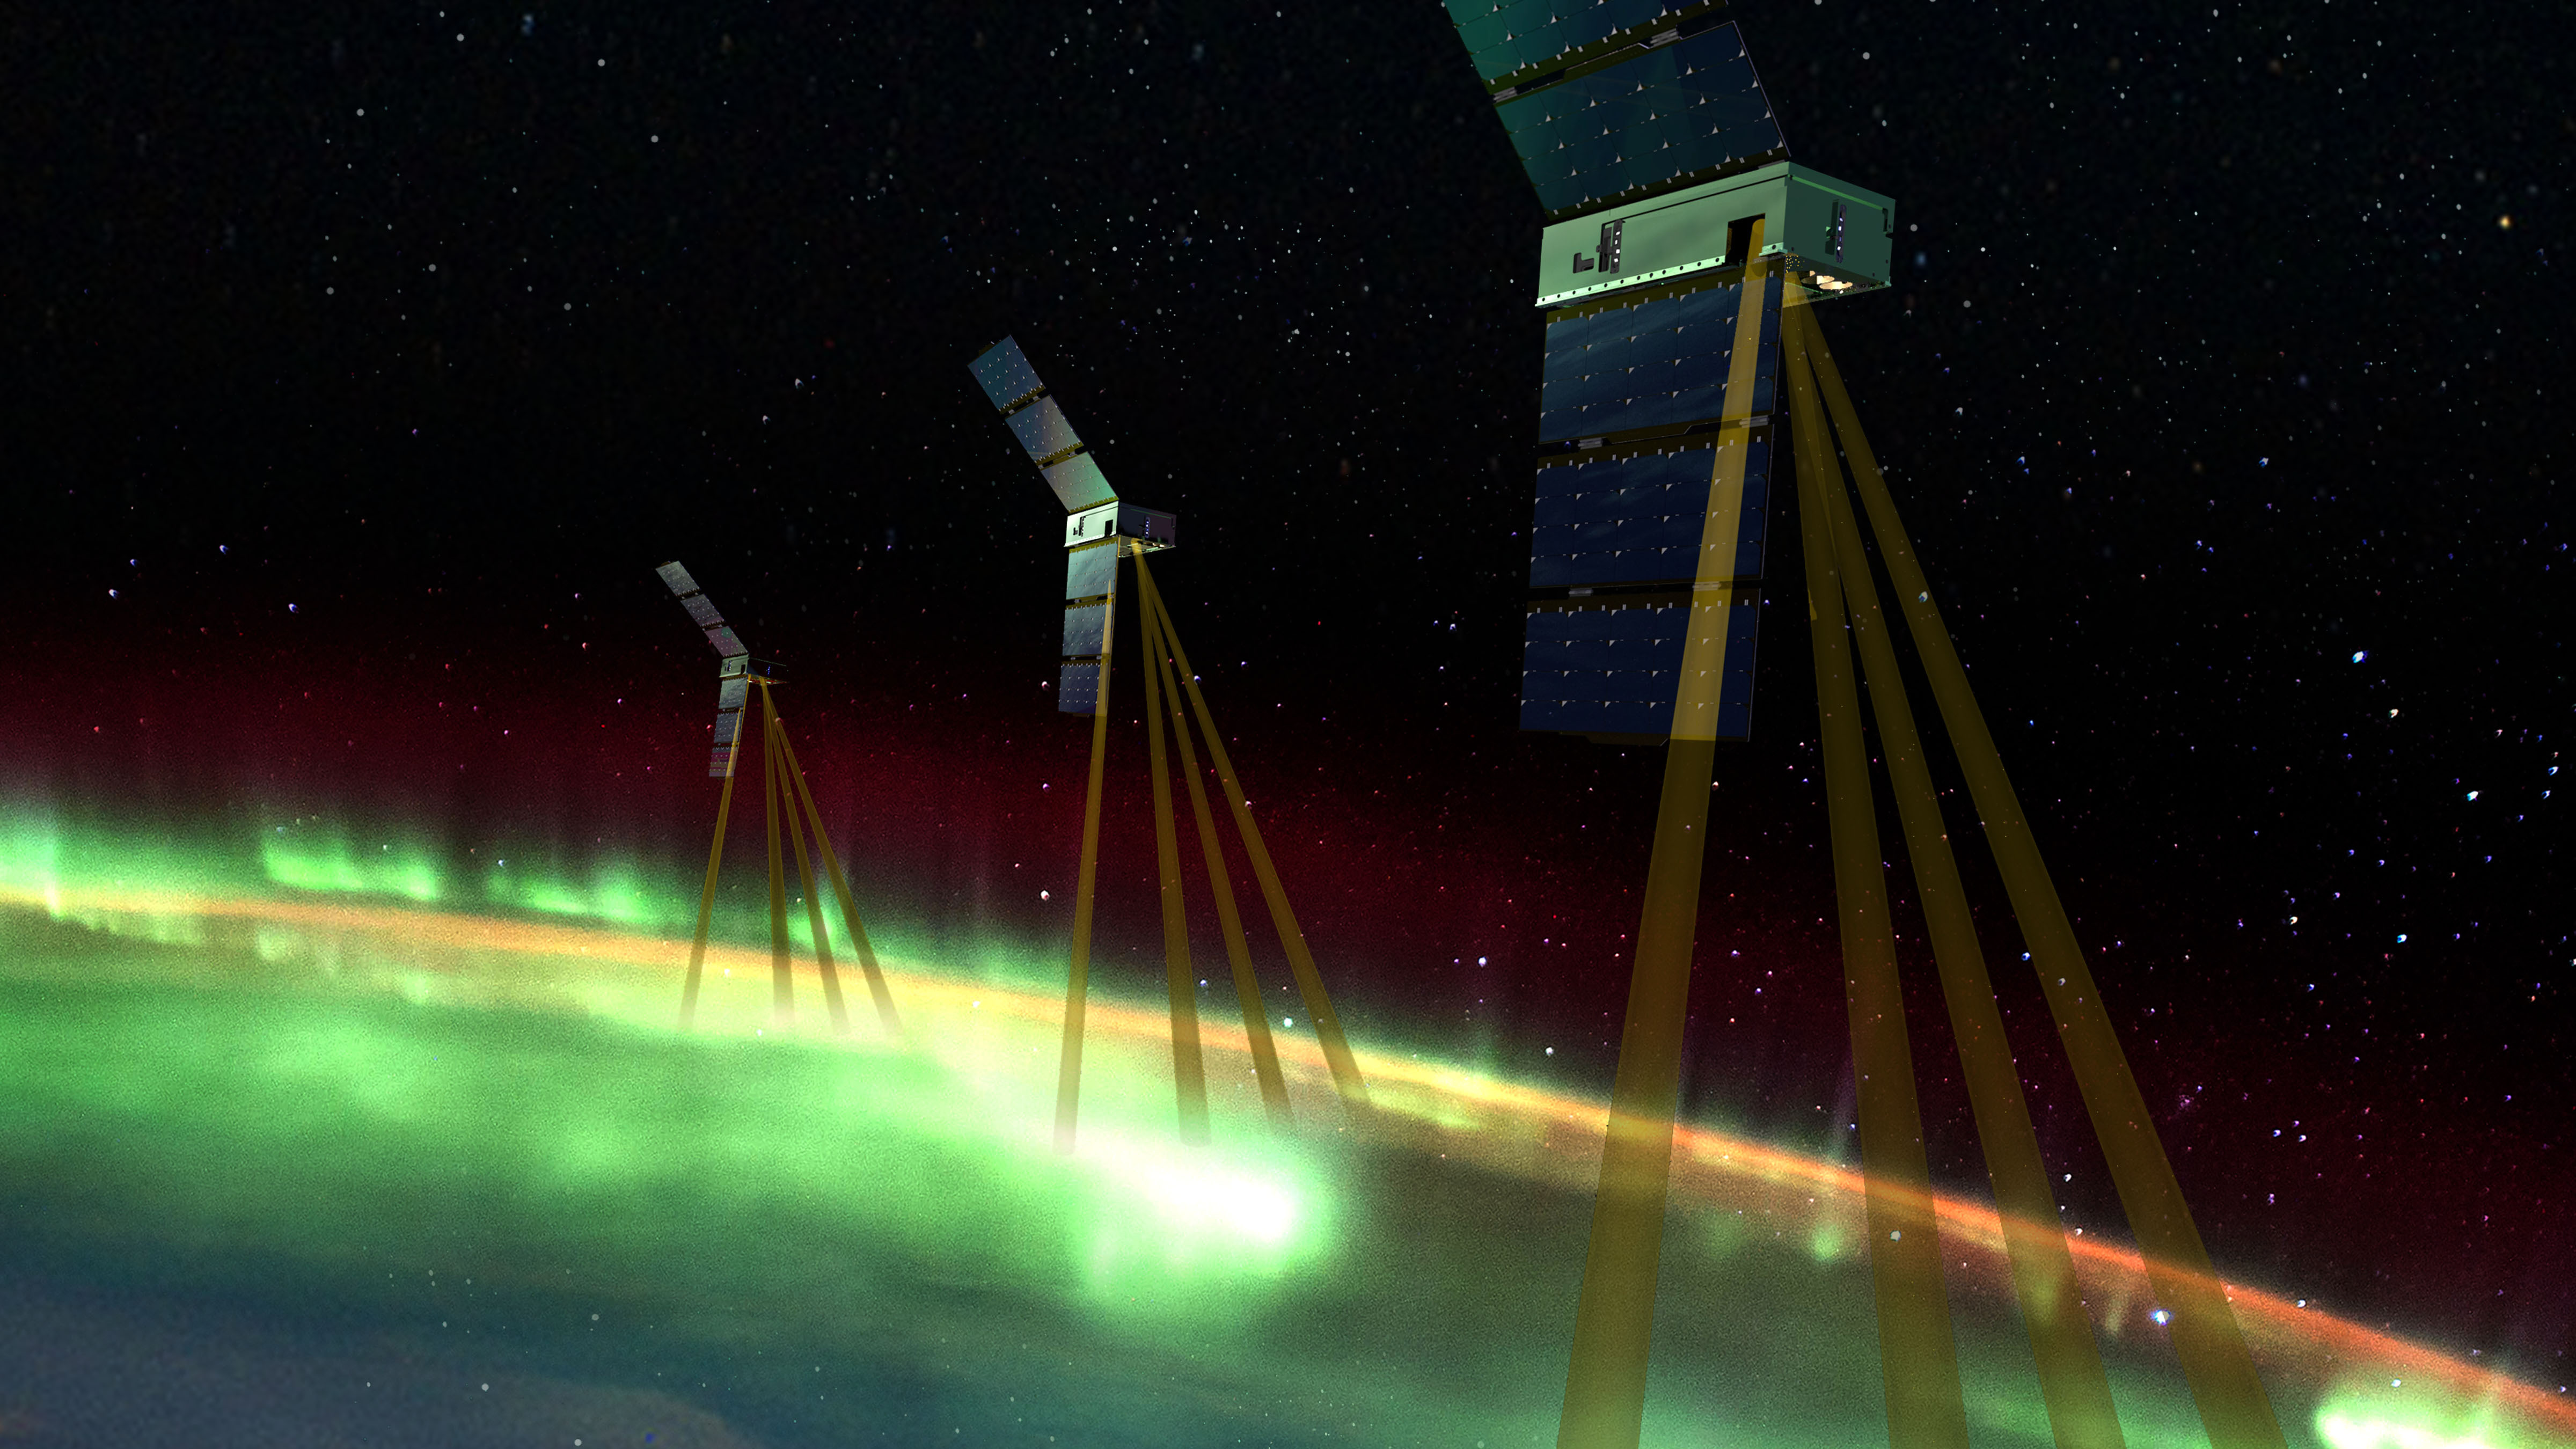 Artist’s conception of the Johns Hopkins APL-led Electrojet Zeeman Imaging Explorer (EZIE) NASA mission. EZIE consists of three SmallSats that will study the auroral electrojet, which are electrical currents flowing about 60 to 90 miles above the poles that link the beautiful aurora to the Earth’s magnetosphere, and which responds to solar activity and other drivers. This space weather mission is scheduled to launch in 2024.  Credit: NASA/Johns Hopkins APL